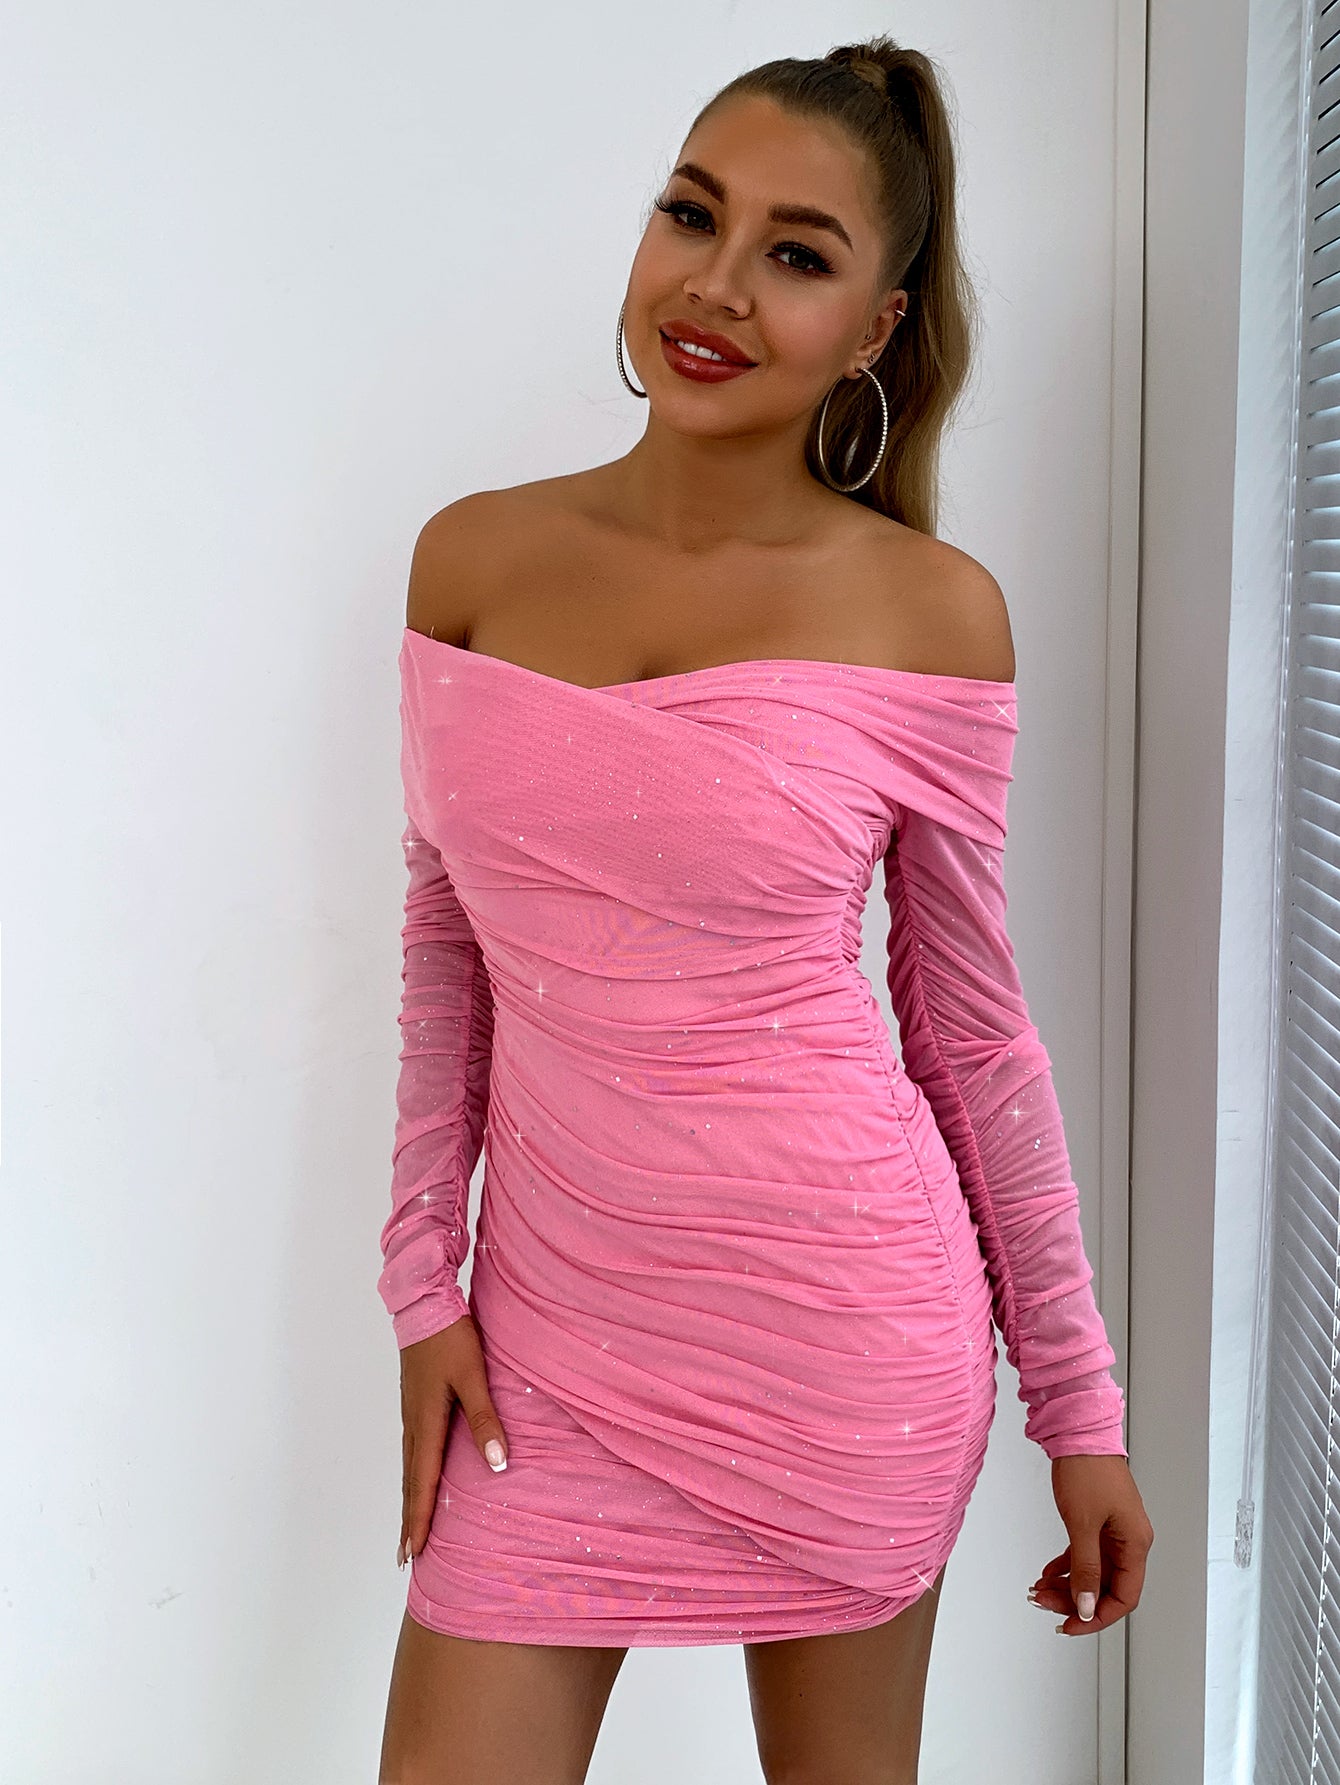 Trendsi Cupid Beauty Supplies Woman Cocktail Dresses Glitter Ruched Off-Shoulder Long Sleeve Bodycon Dress